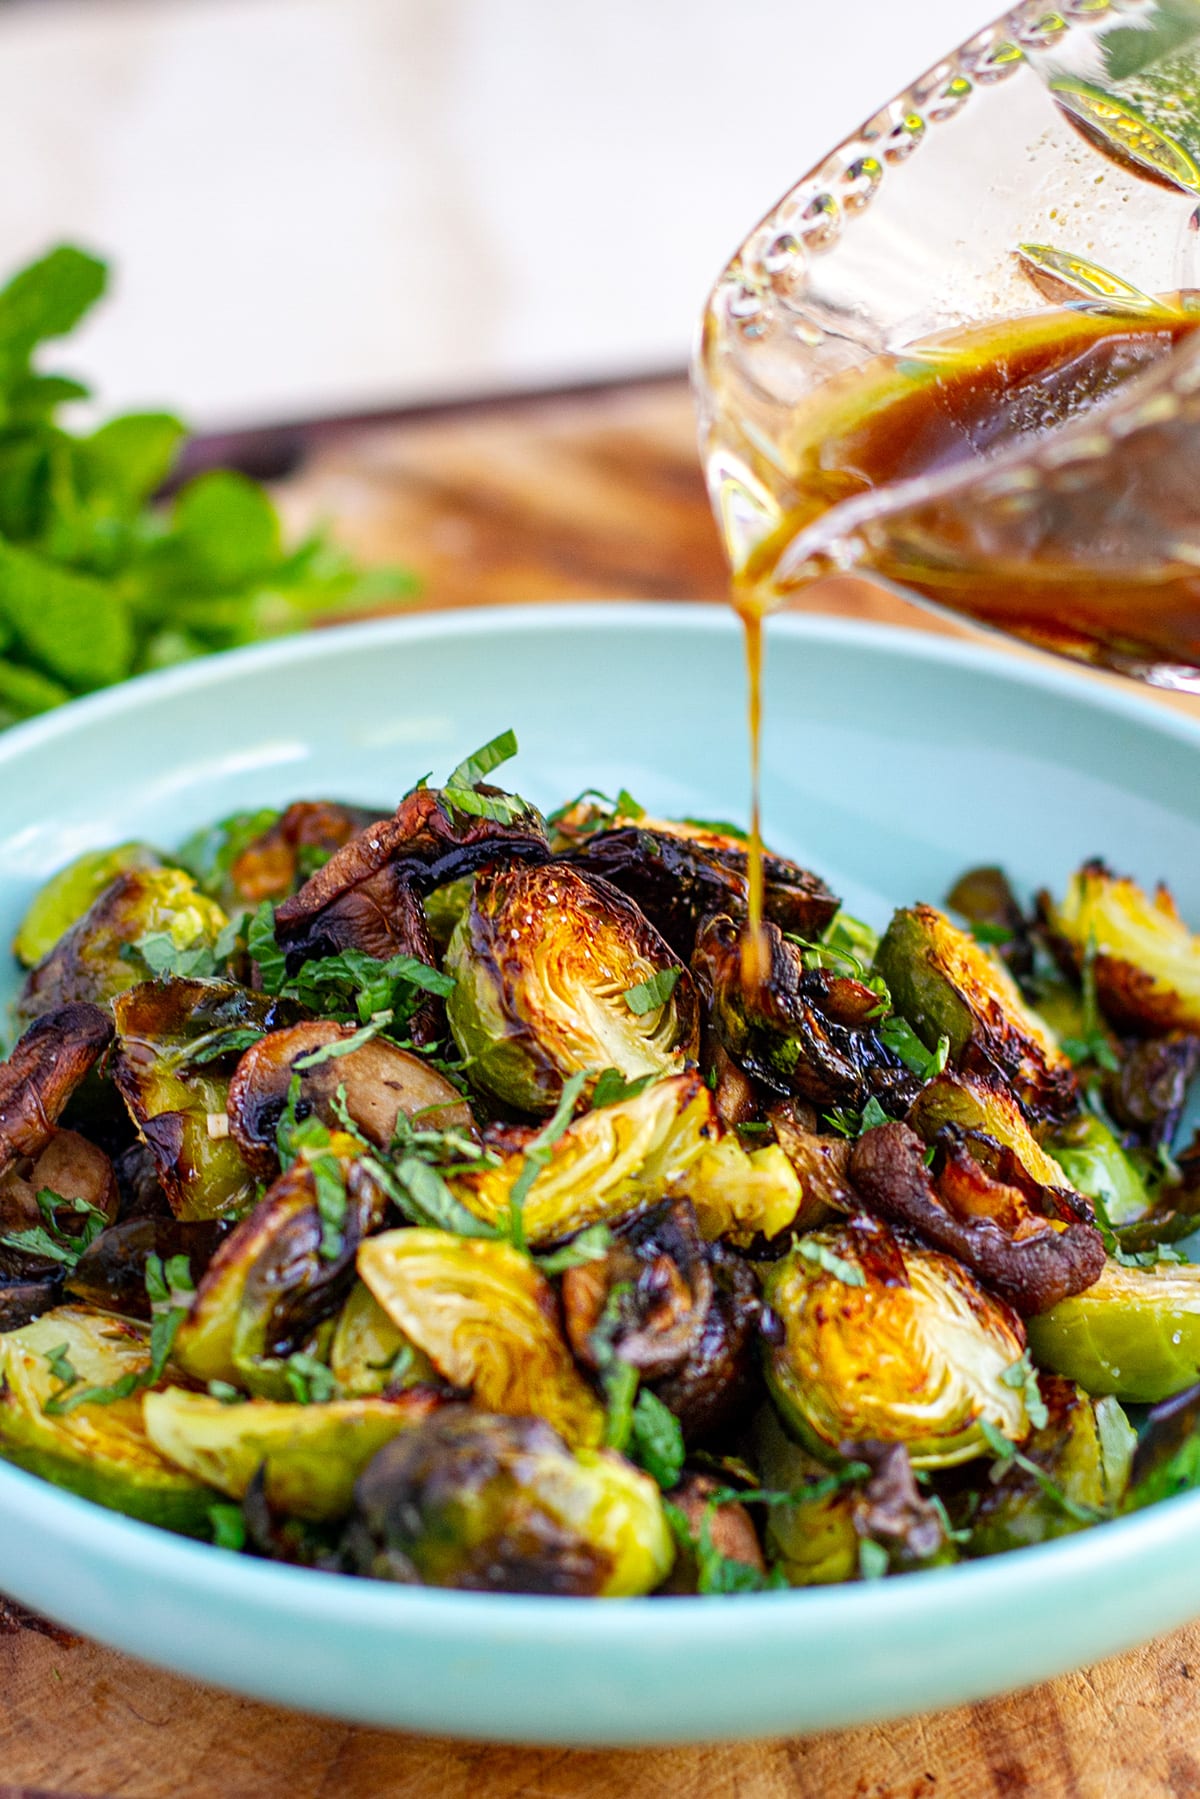 Honey Balsamic Roasted Brussels Sprouts (seriously, the BEST!)